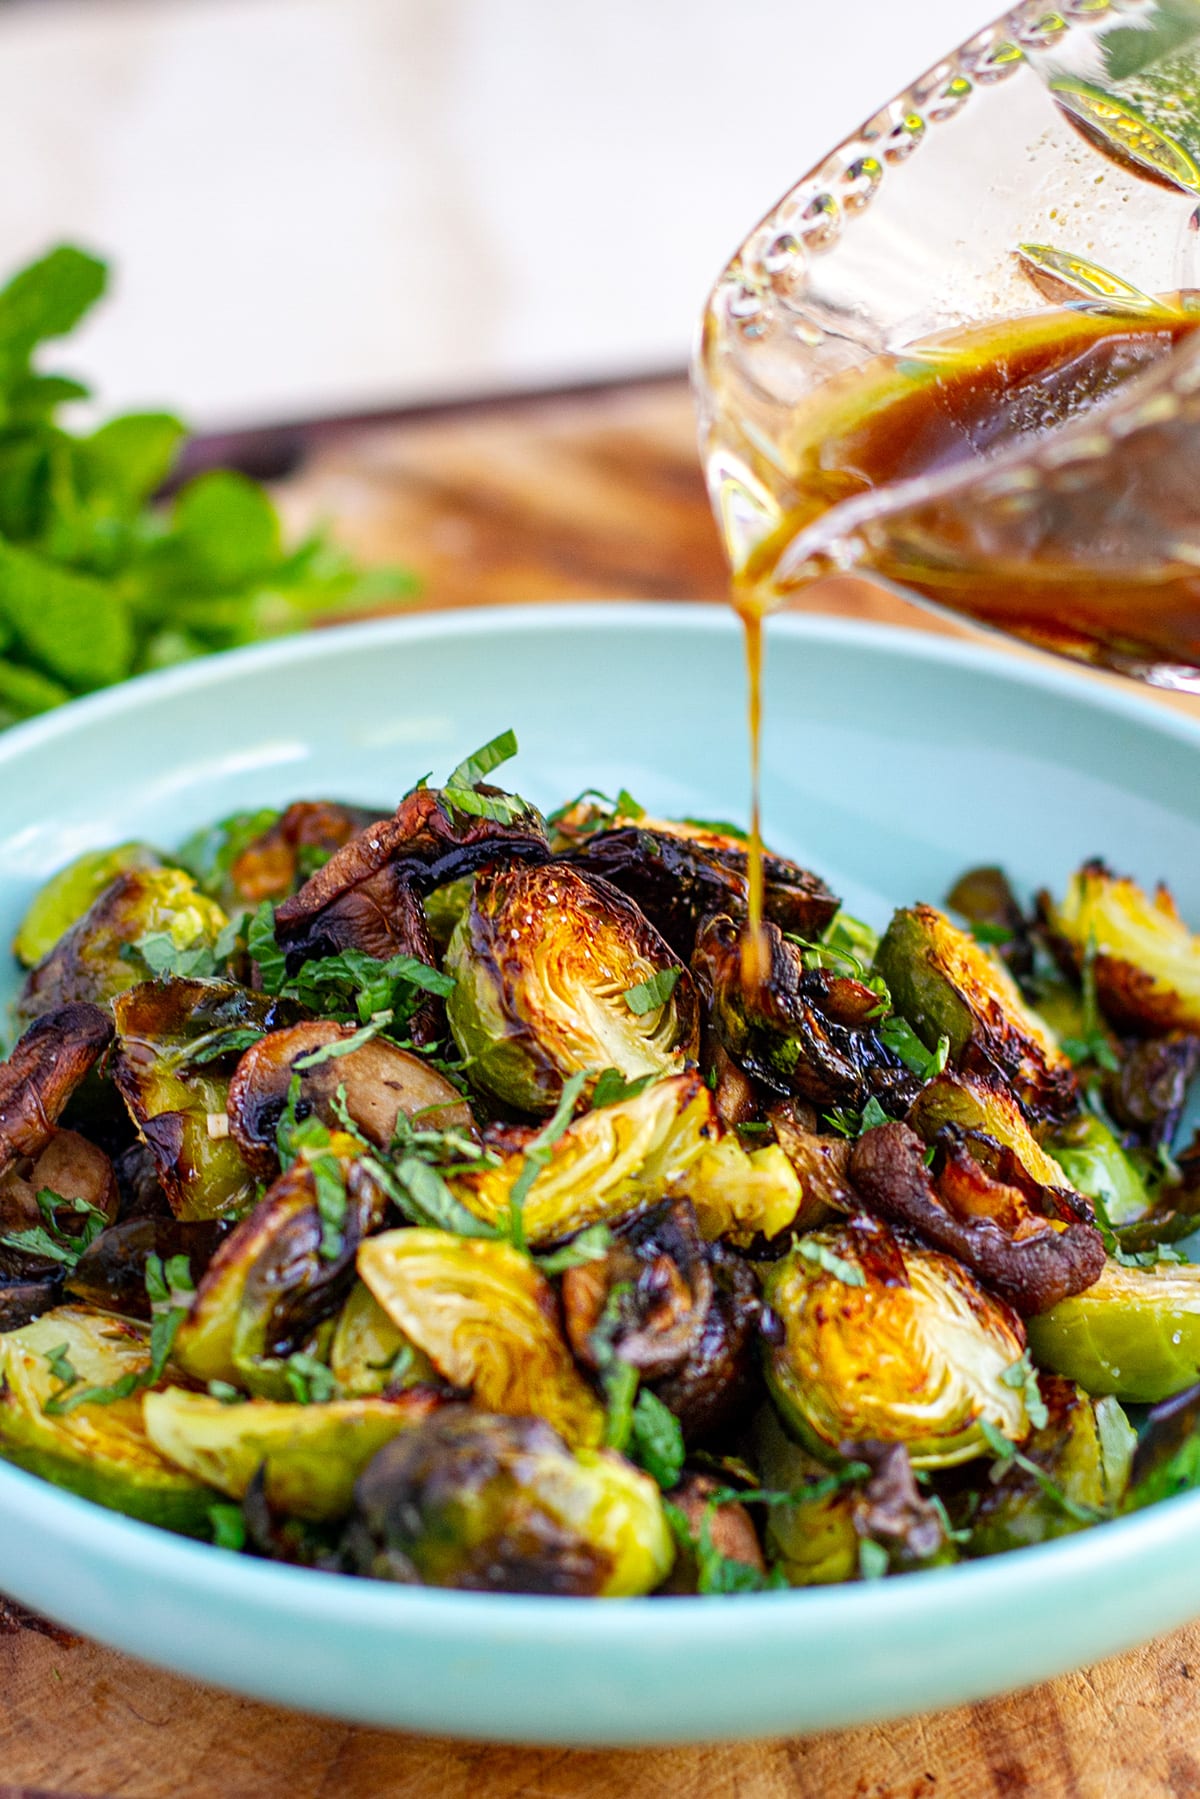 Honey Balsamic Roasted Brussels Sprouts (seriously, the BEST!)